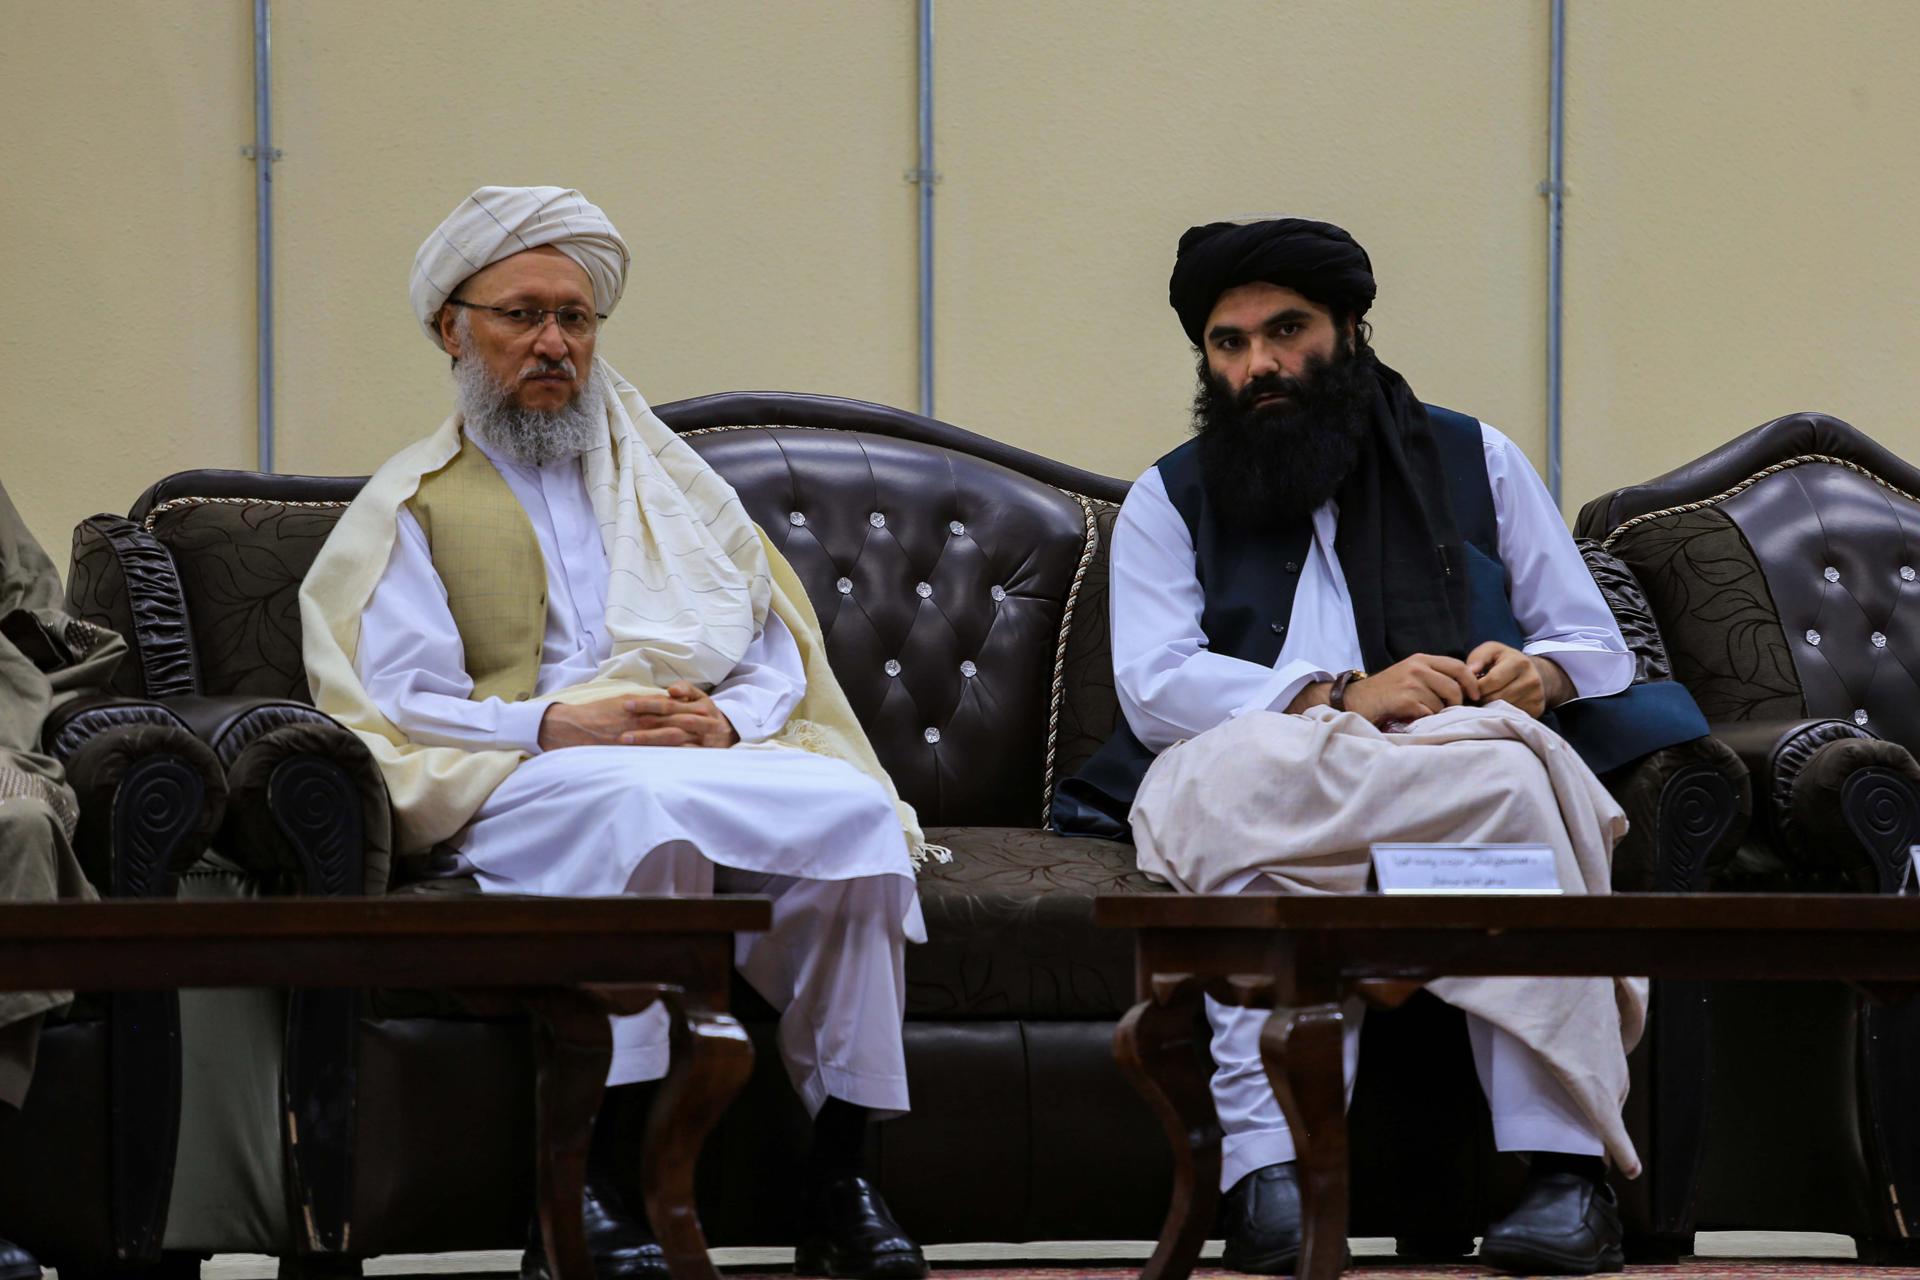 Afghan second deputy Prime Minister Mullah Abdul Salam Hanafi (L), and Interior Minister of Afghanistan Sirajuddin Haqqani (R) look on during a ceremony in Kabul, Afghanistan, 03 April 2022. EFE-EPA FILE/STRINGER